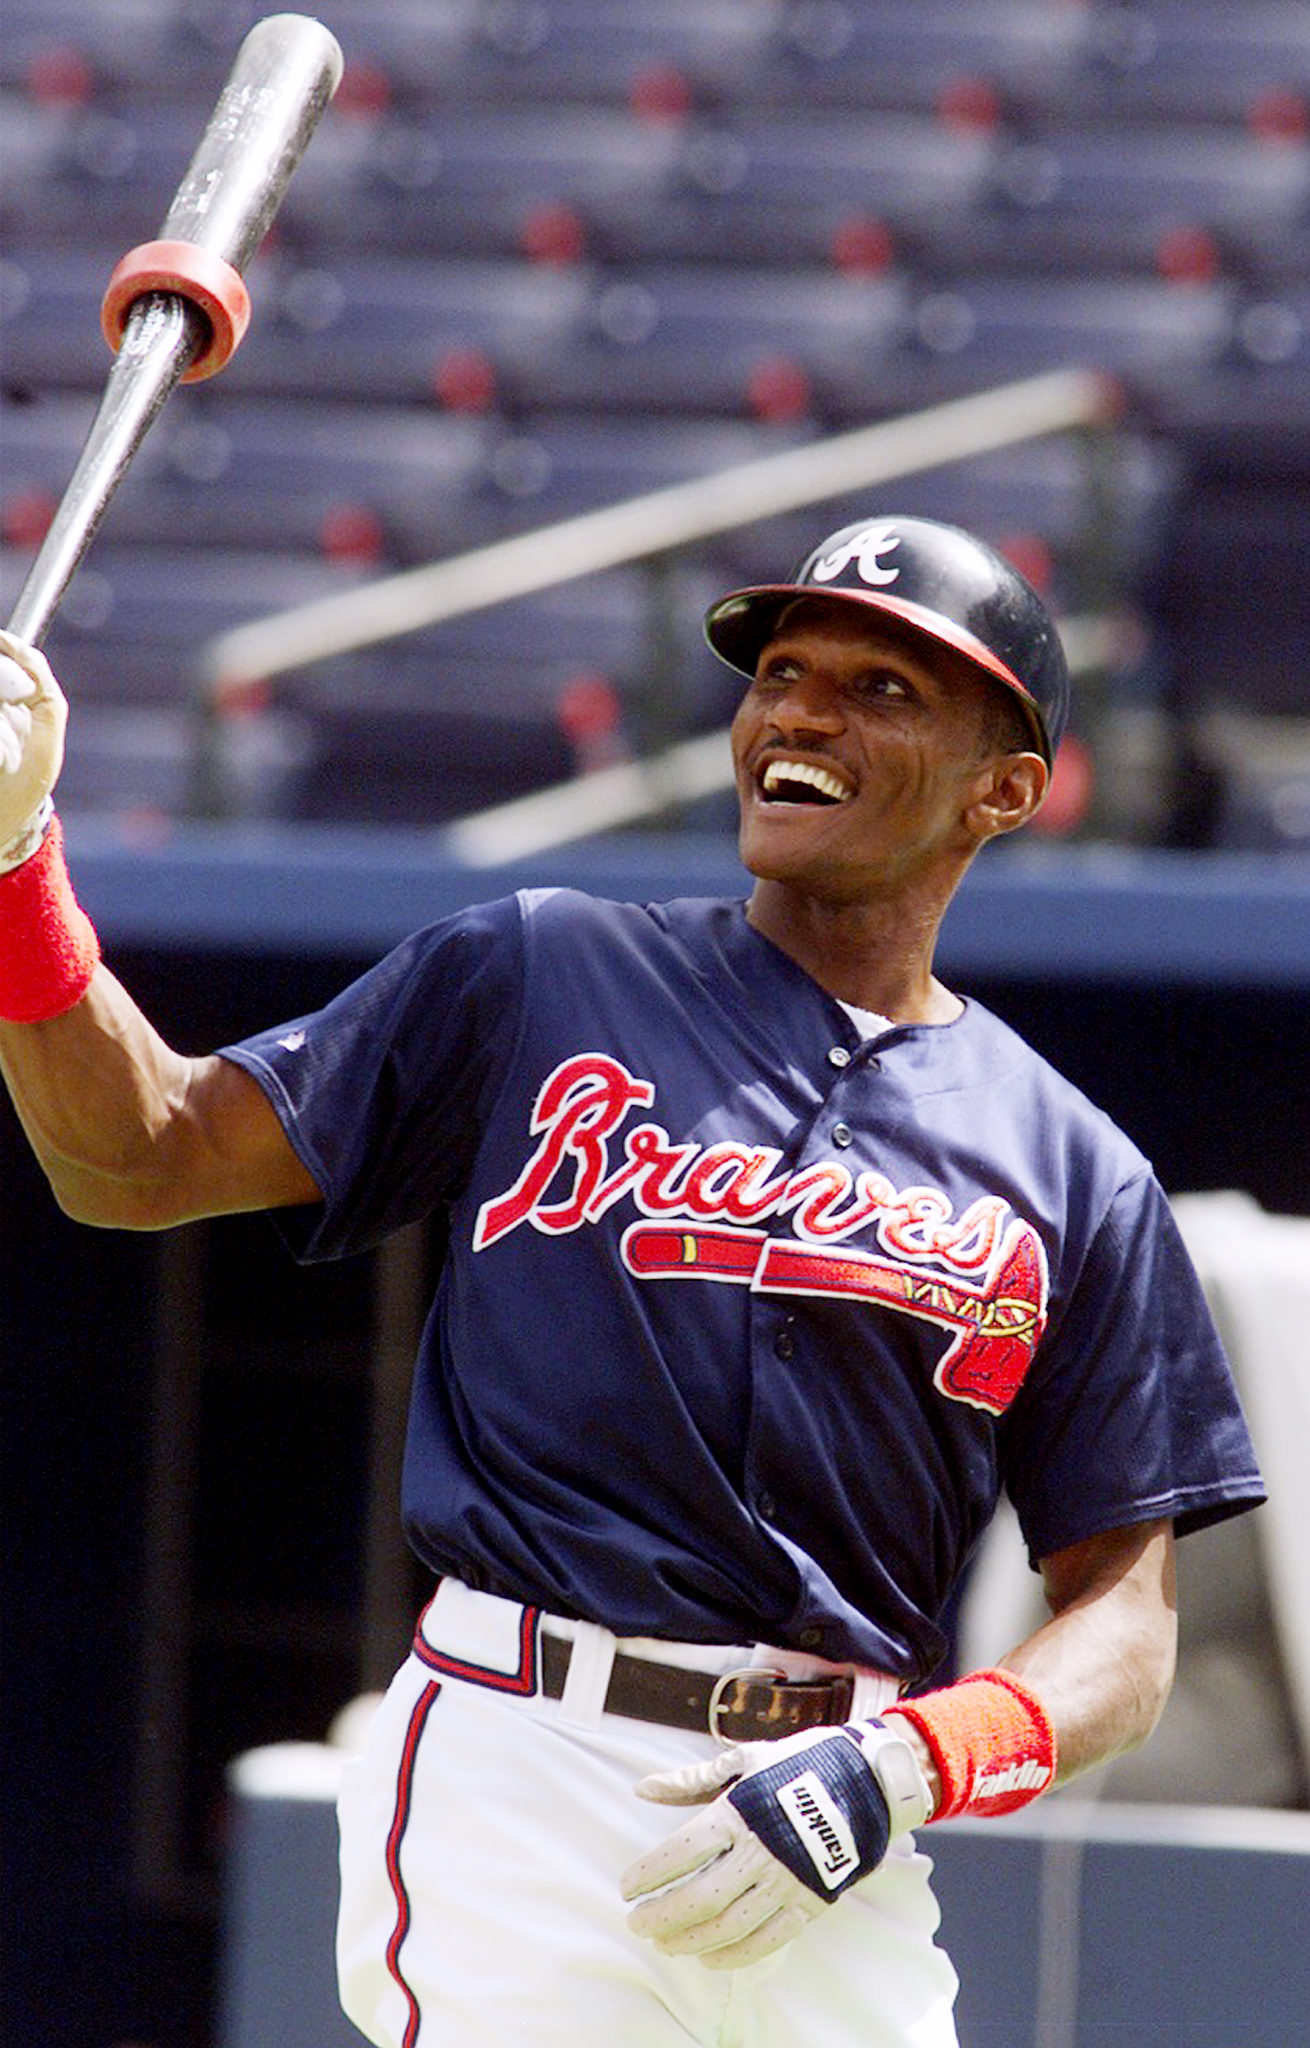 Otis Nixon takes a swing at batting practice for the NLCS opener against the New York Mets in 1999 in Atlanta. | Source: Getty Images